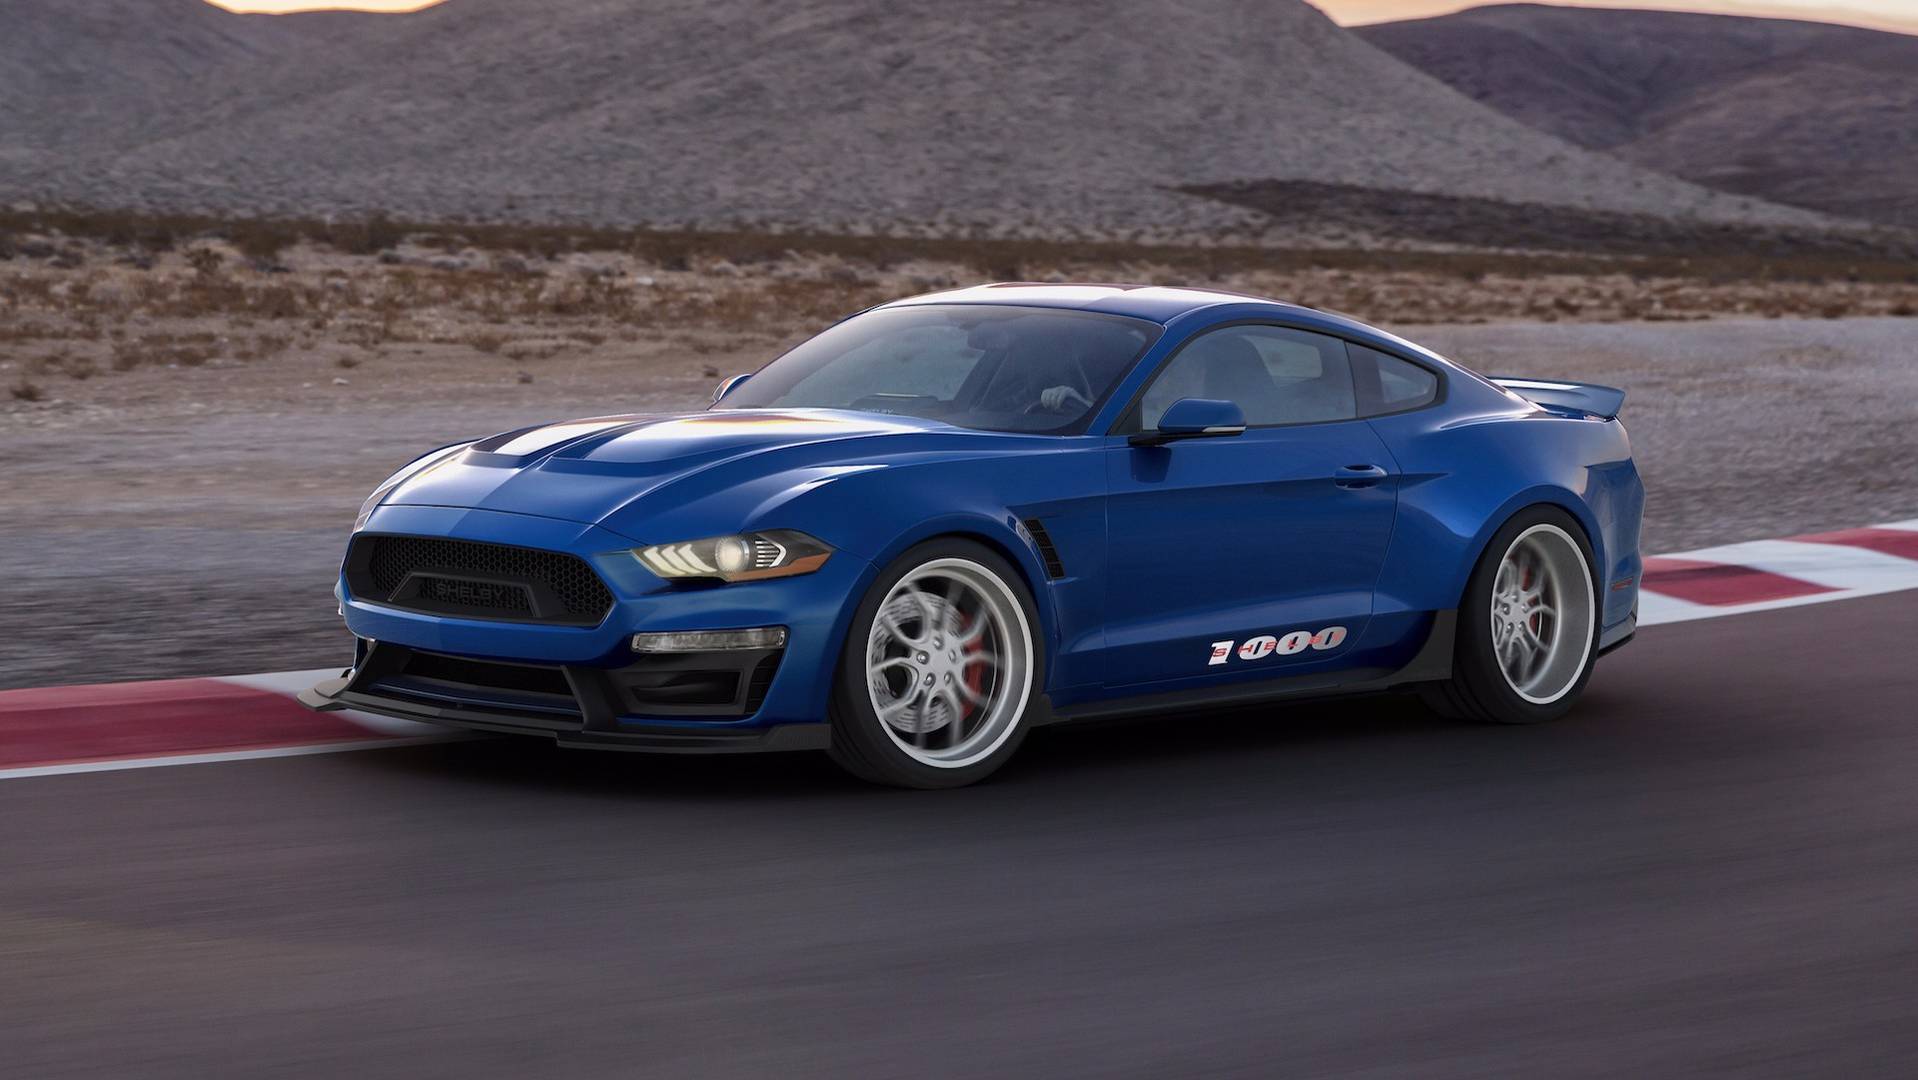 2019 Ford Shelby Gt500 2018 Cars Review | Autos Post